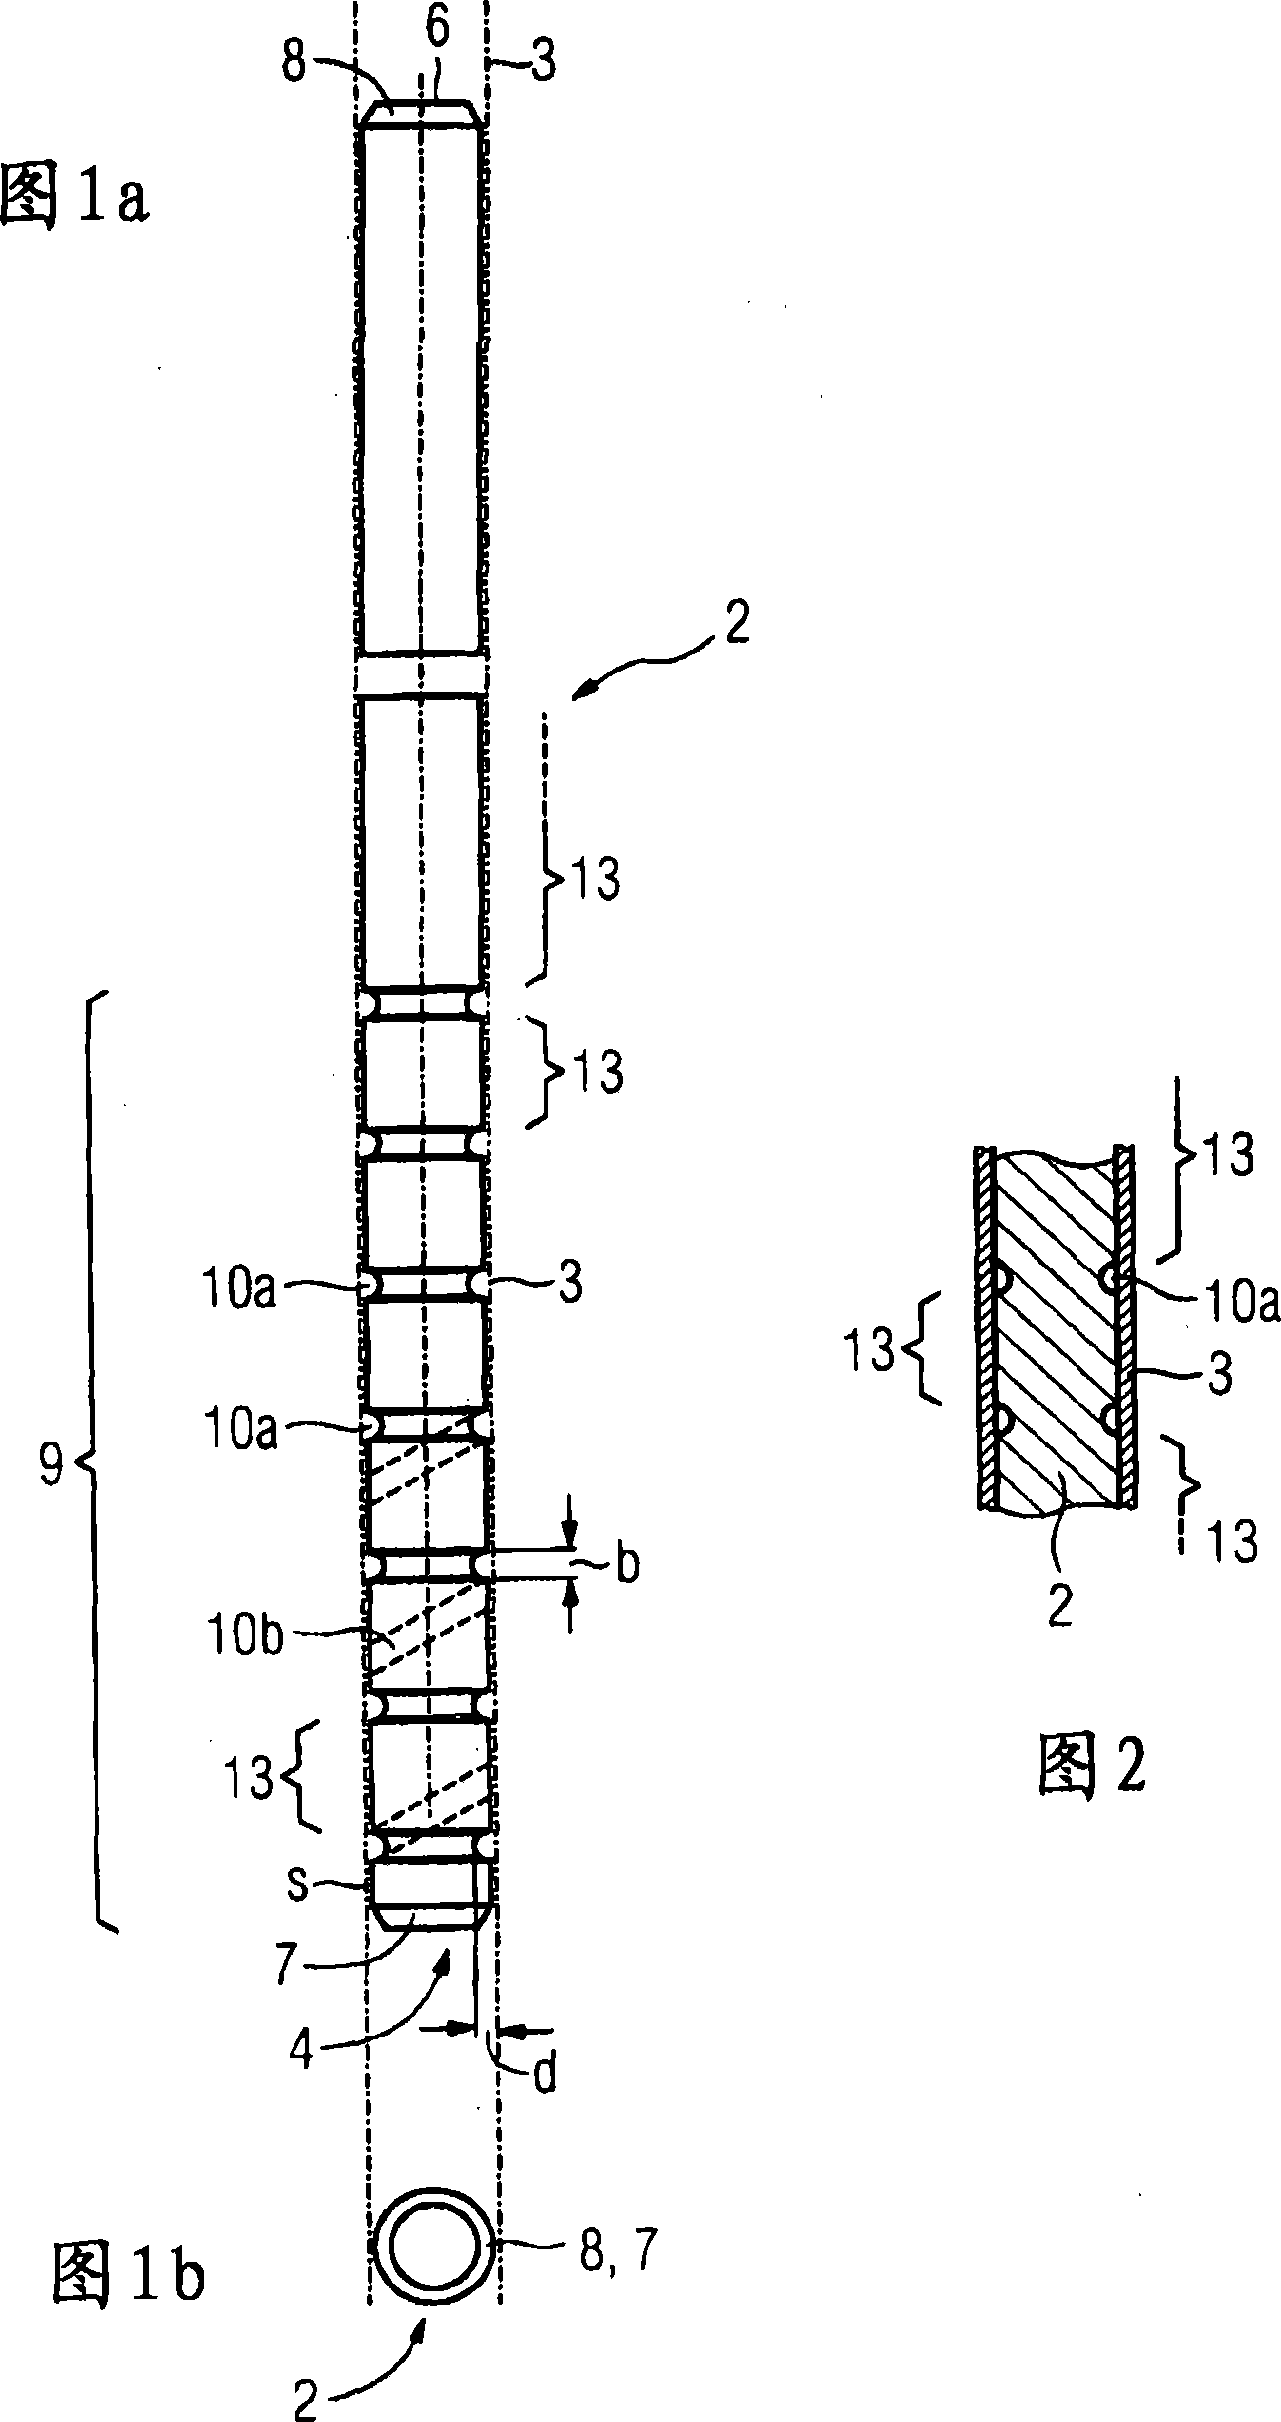 Control rod for a pressurized-water nuclear reactor